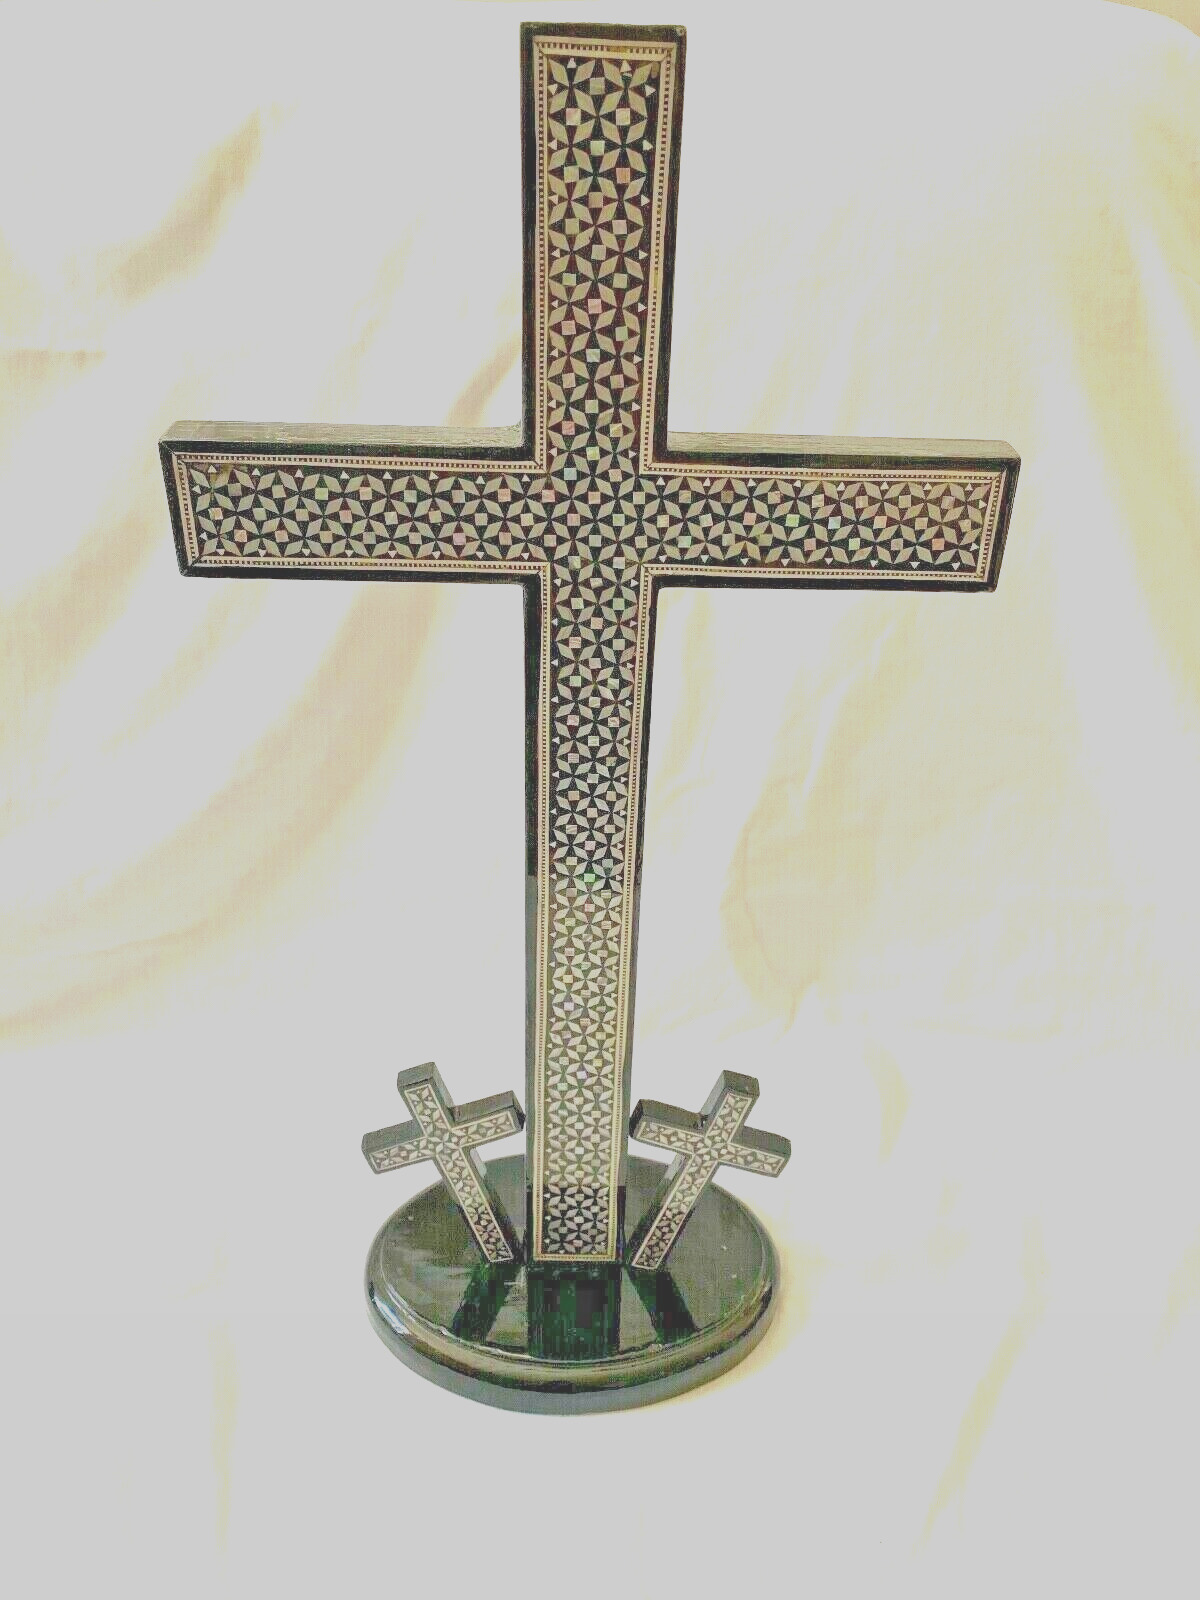 X-Large Egyptian Handmade Inlaid Wooden Triple Cross on Stand 20.5